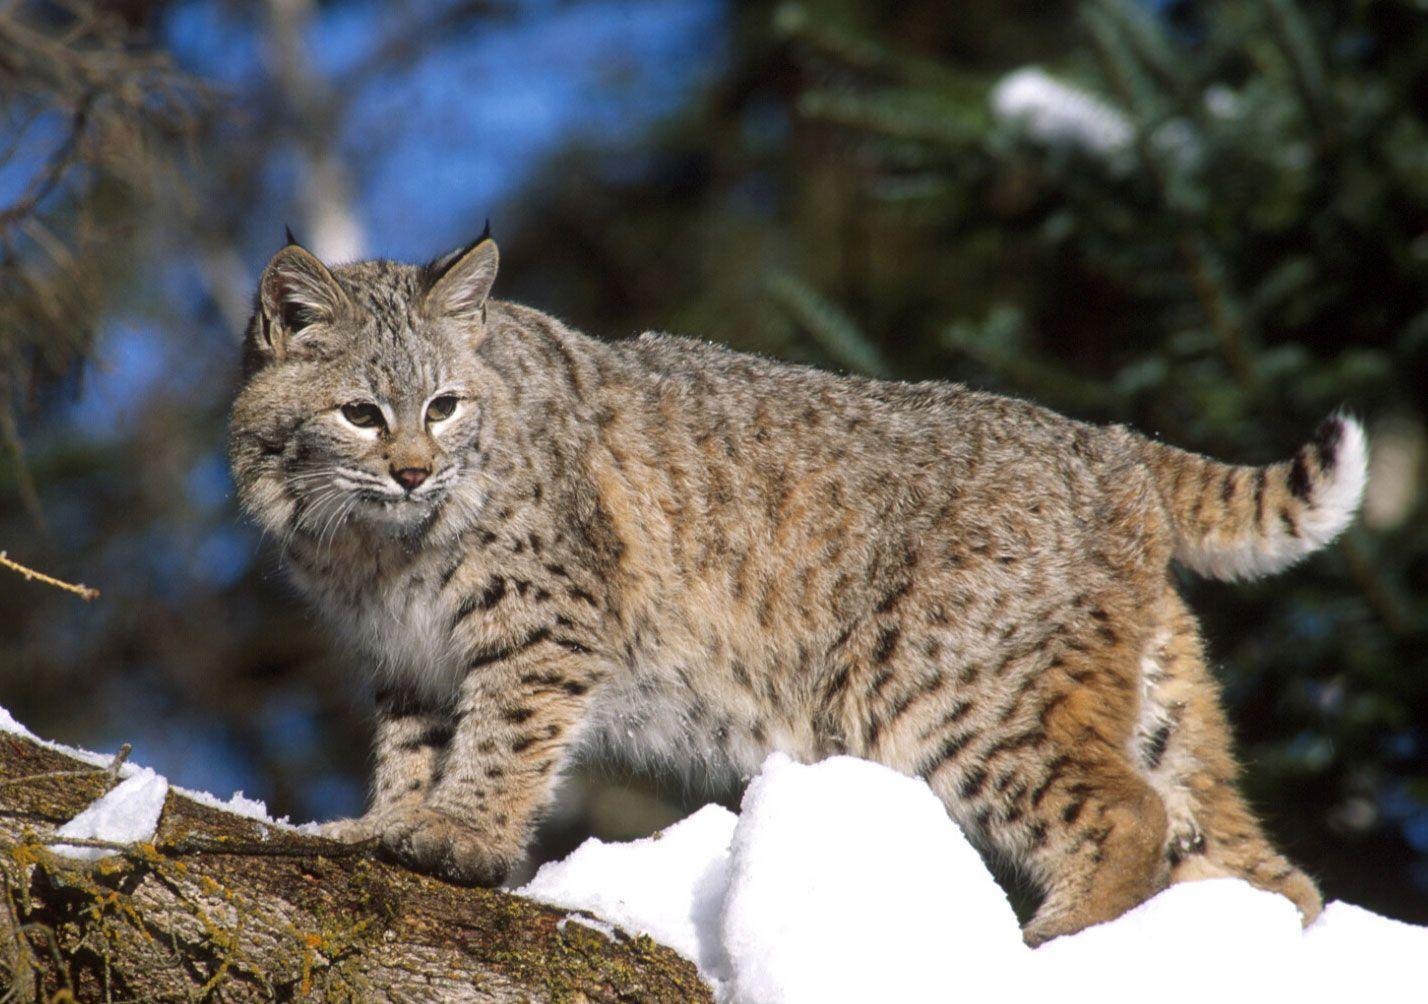 Bobcat Gallery of Wallpaper, Free Download For Android, Desktop